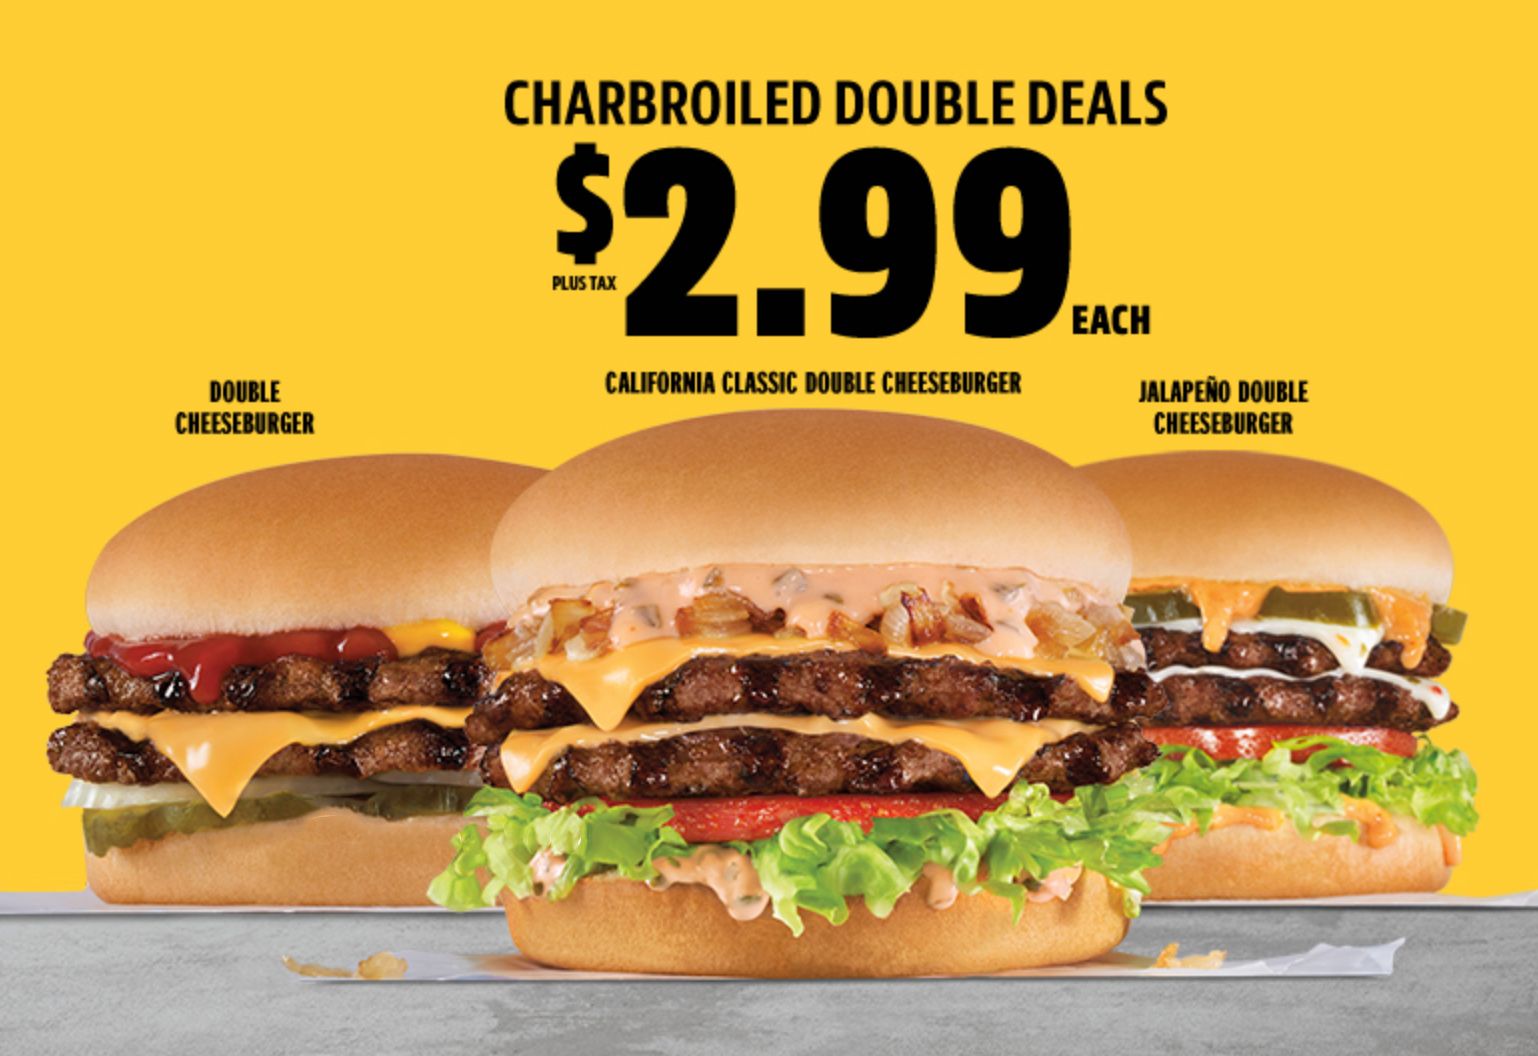 Carl's Jr. Announces their New $2.99 Charbroiled Double Deals Menu with the California Classic Double Cheeseburger & More